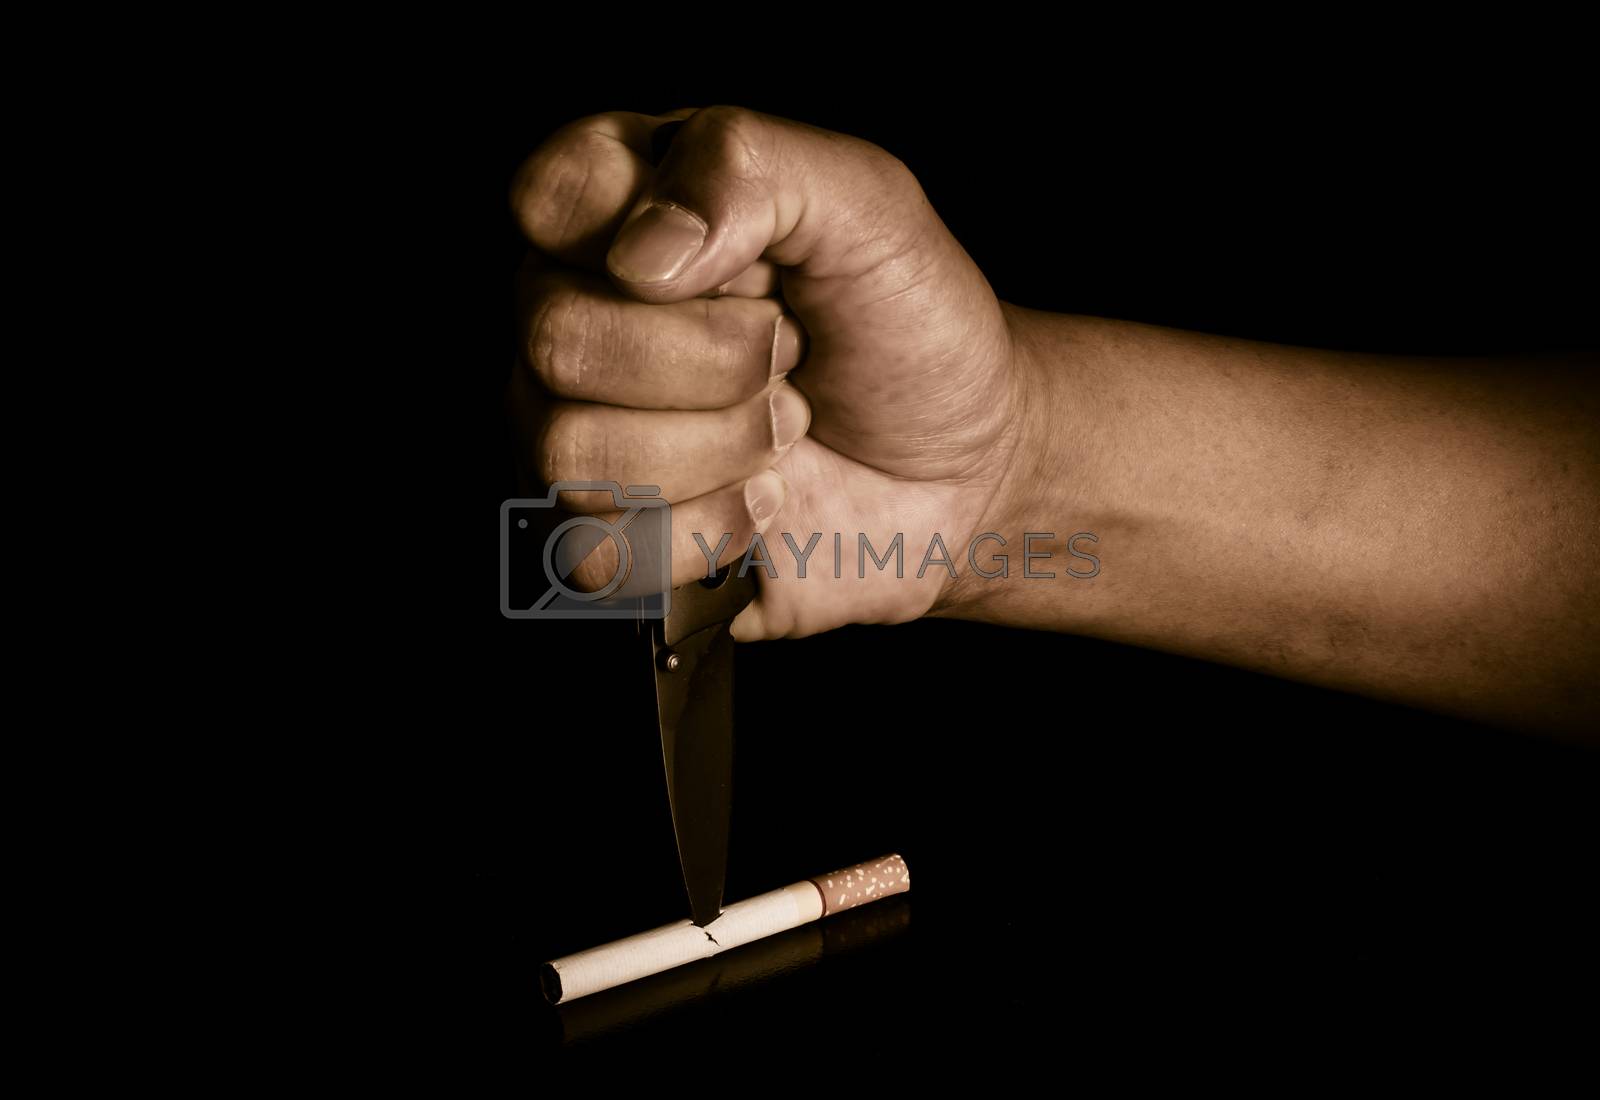 Royalty free image of Handle knife stabbed into cigarettes concept eliminate smoking, quit smoking. by photobyphotoboy